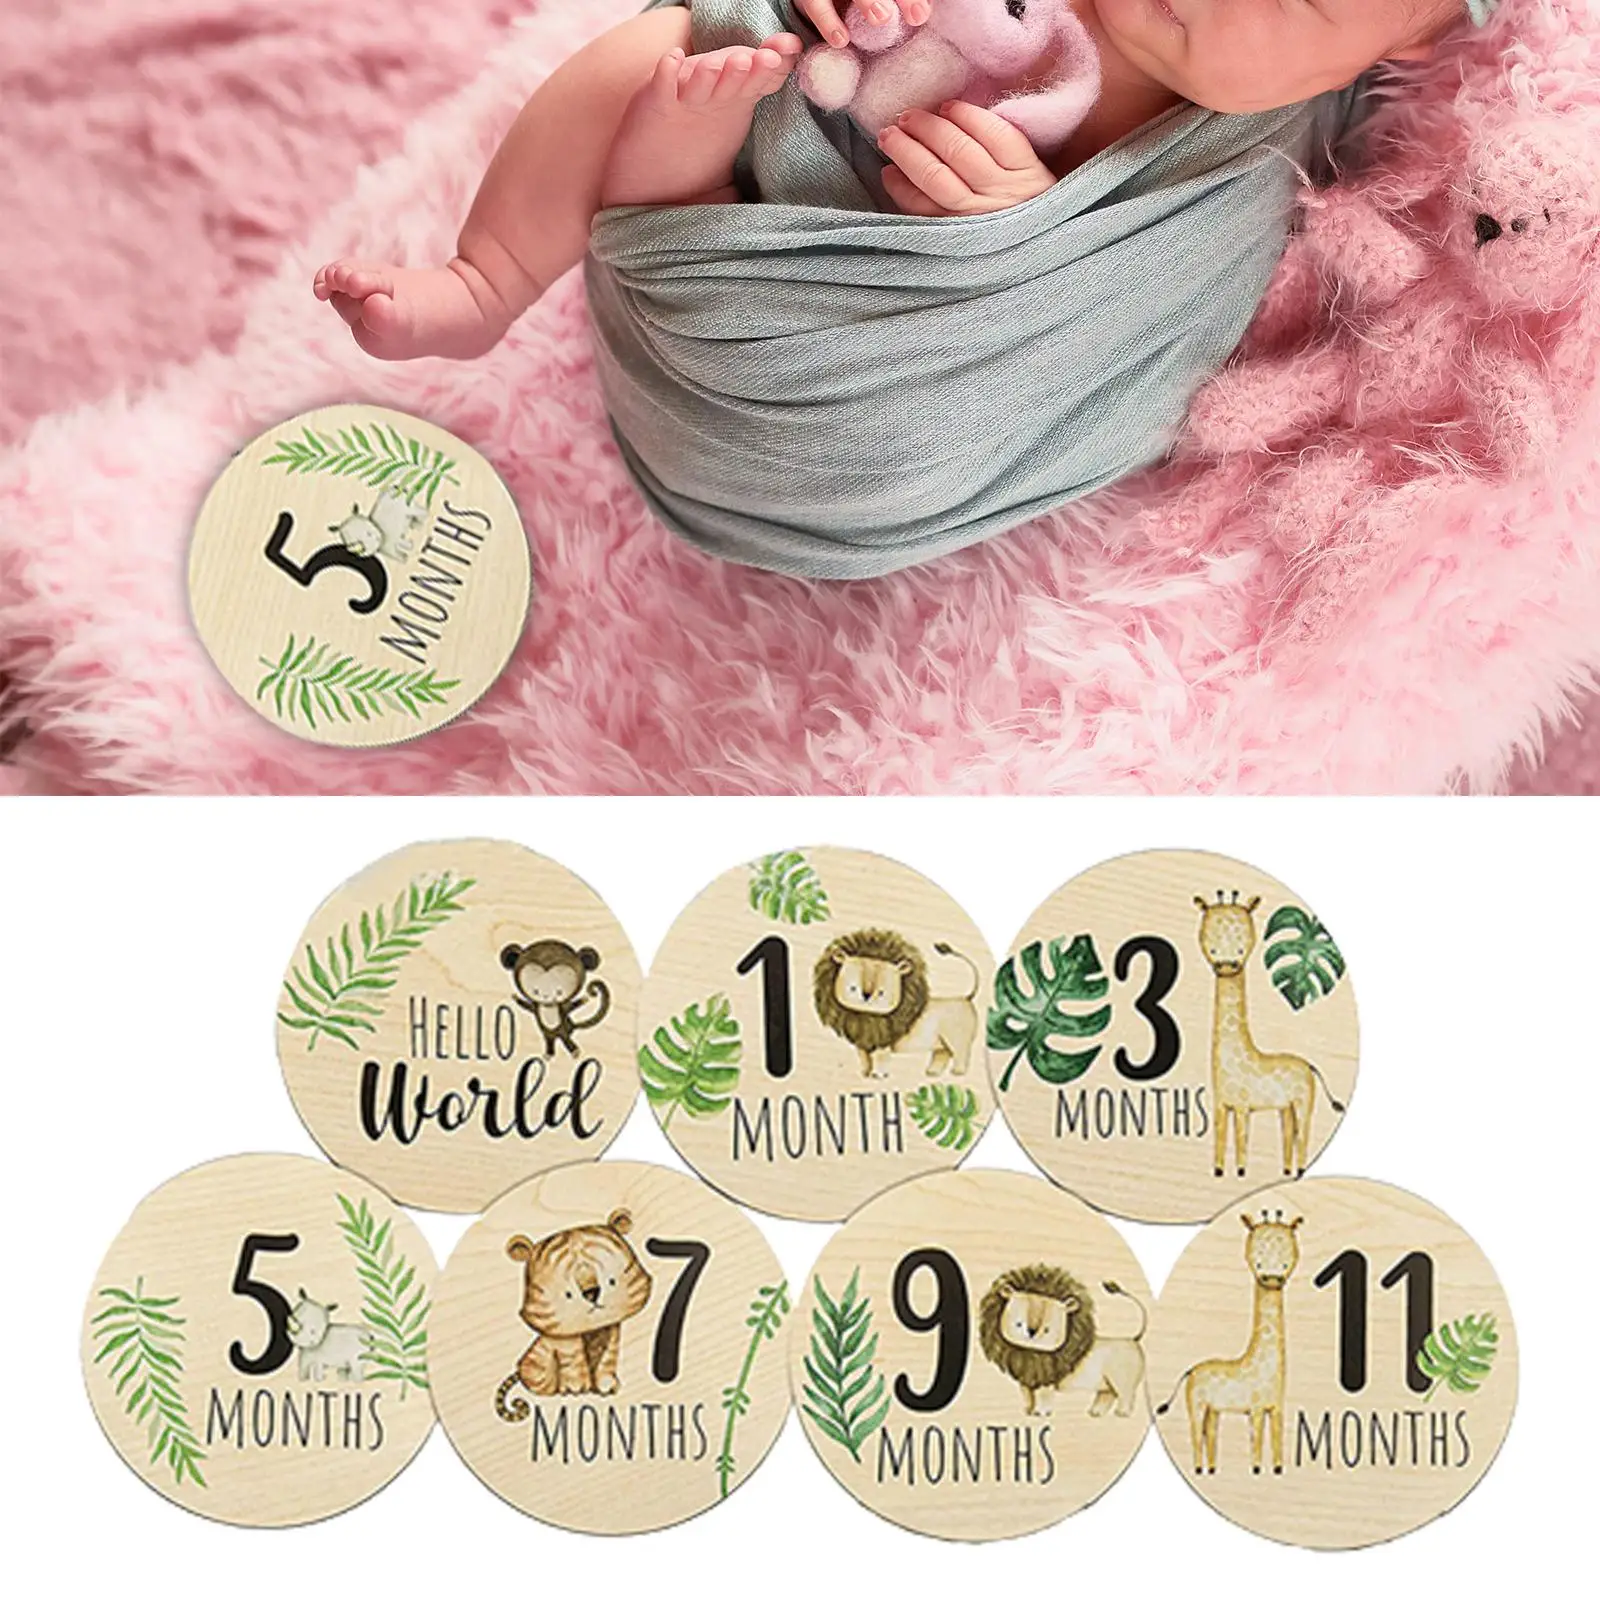 7x Wooden Baby Milestone Cards Baby Months Signs 1-12 Months Newborn Photoshoot Props for Baby Growth Home Table Decoration